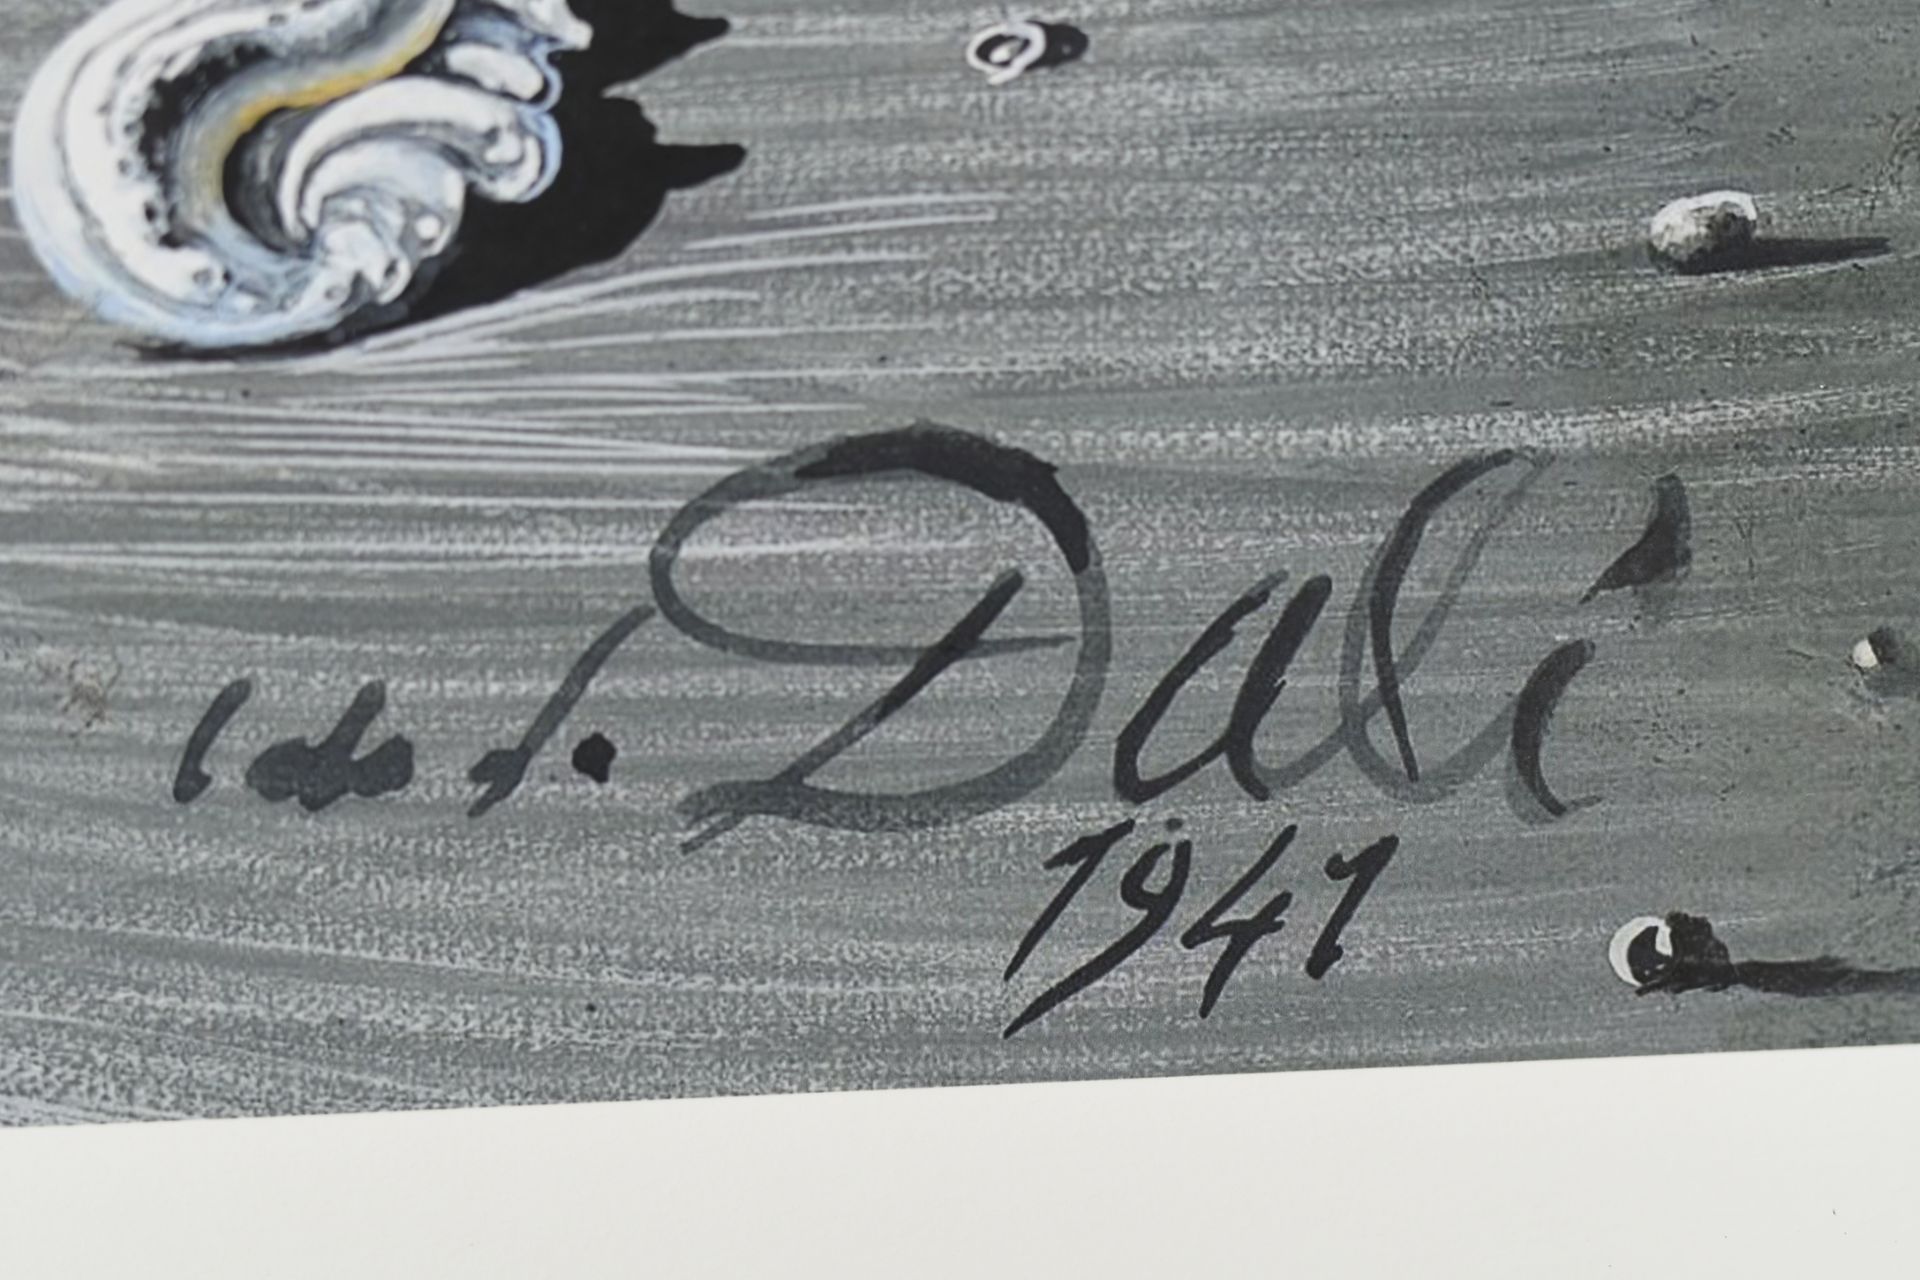 Salvador Dali Limited Edition One of only 95 Published. - Image 4 of 9